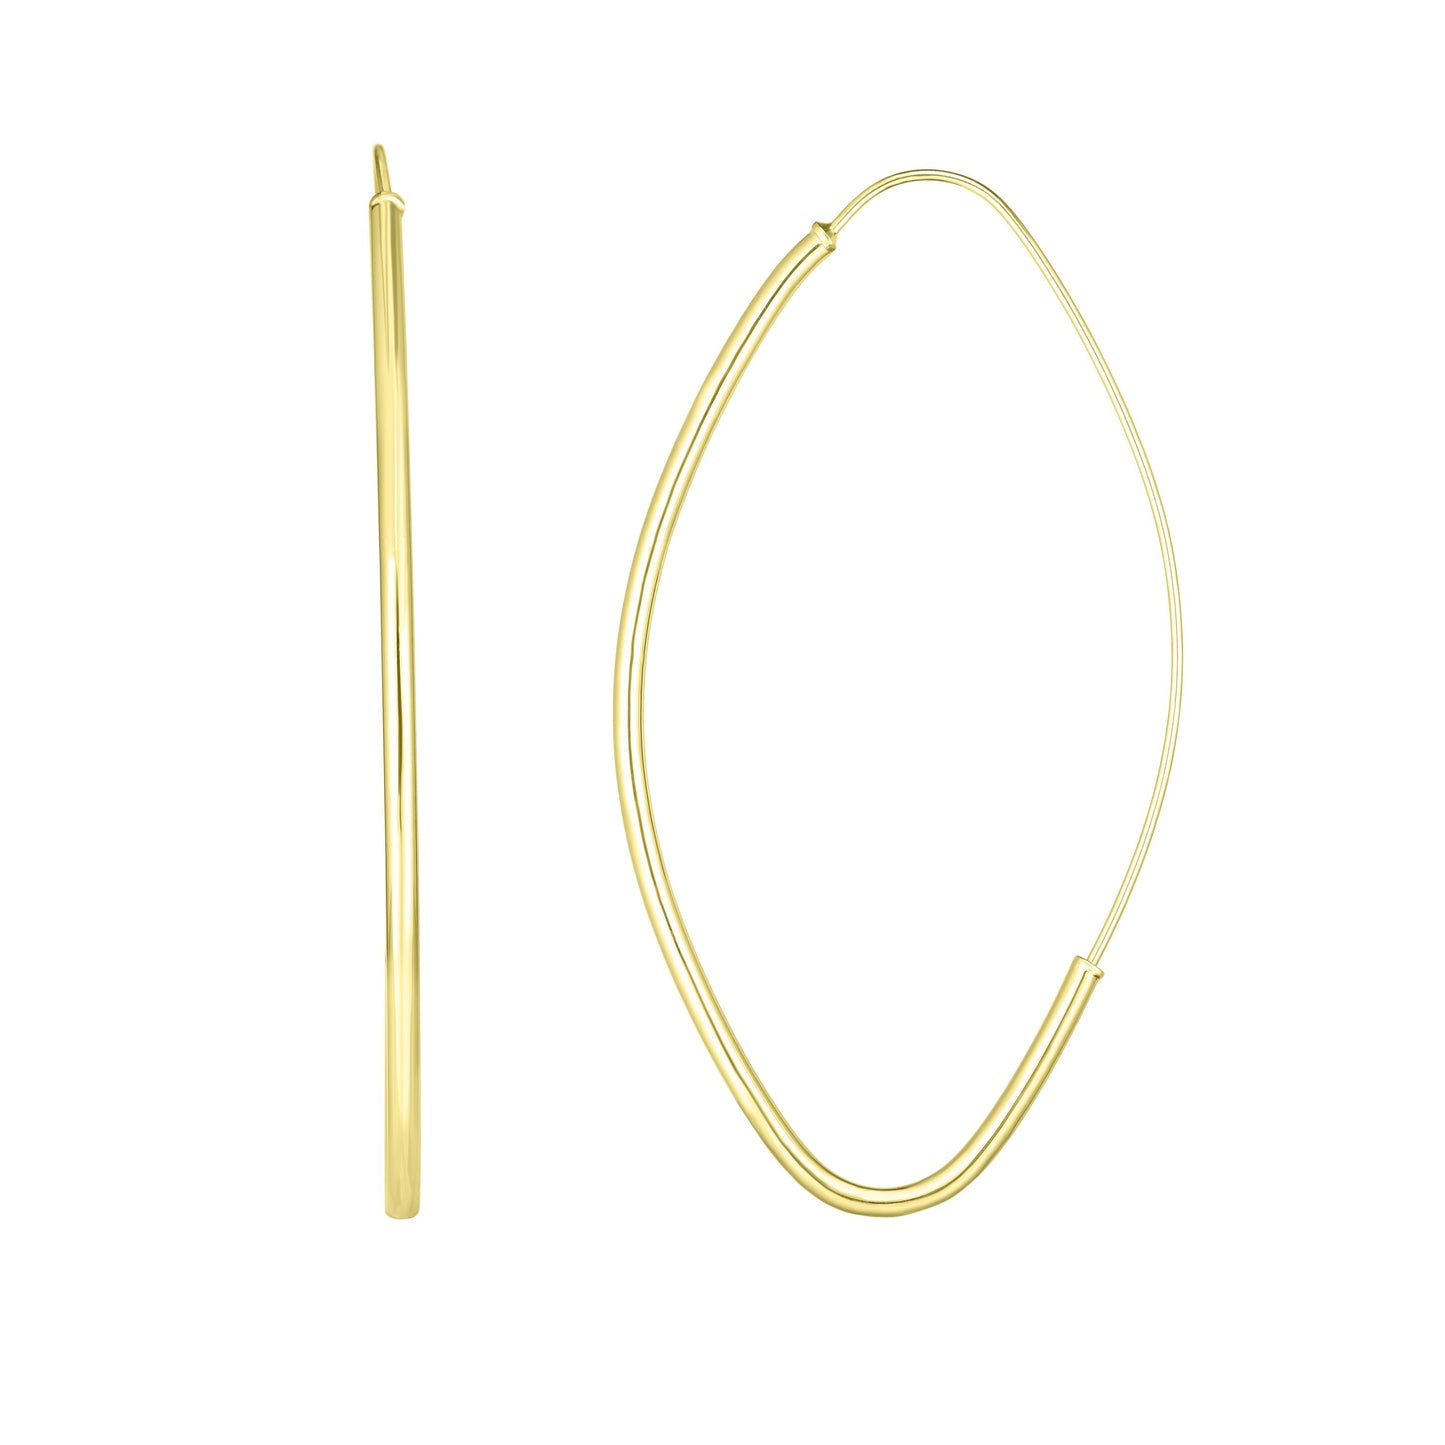 14K Gold Polished Marquise Fashion Hoop Earring